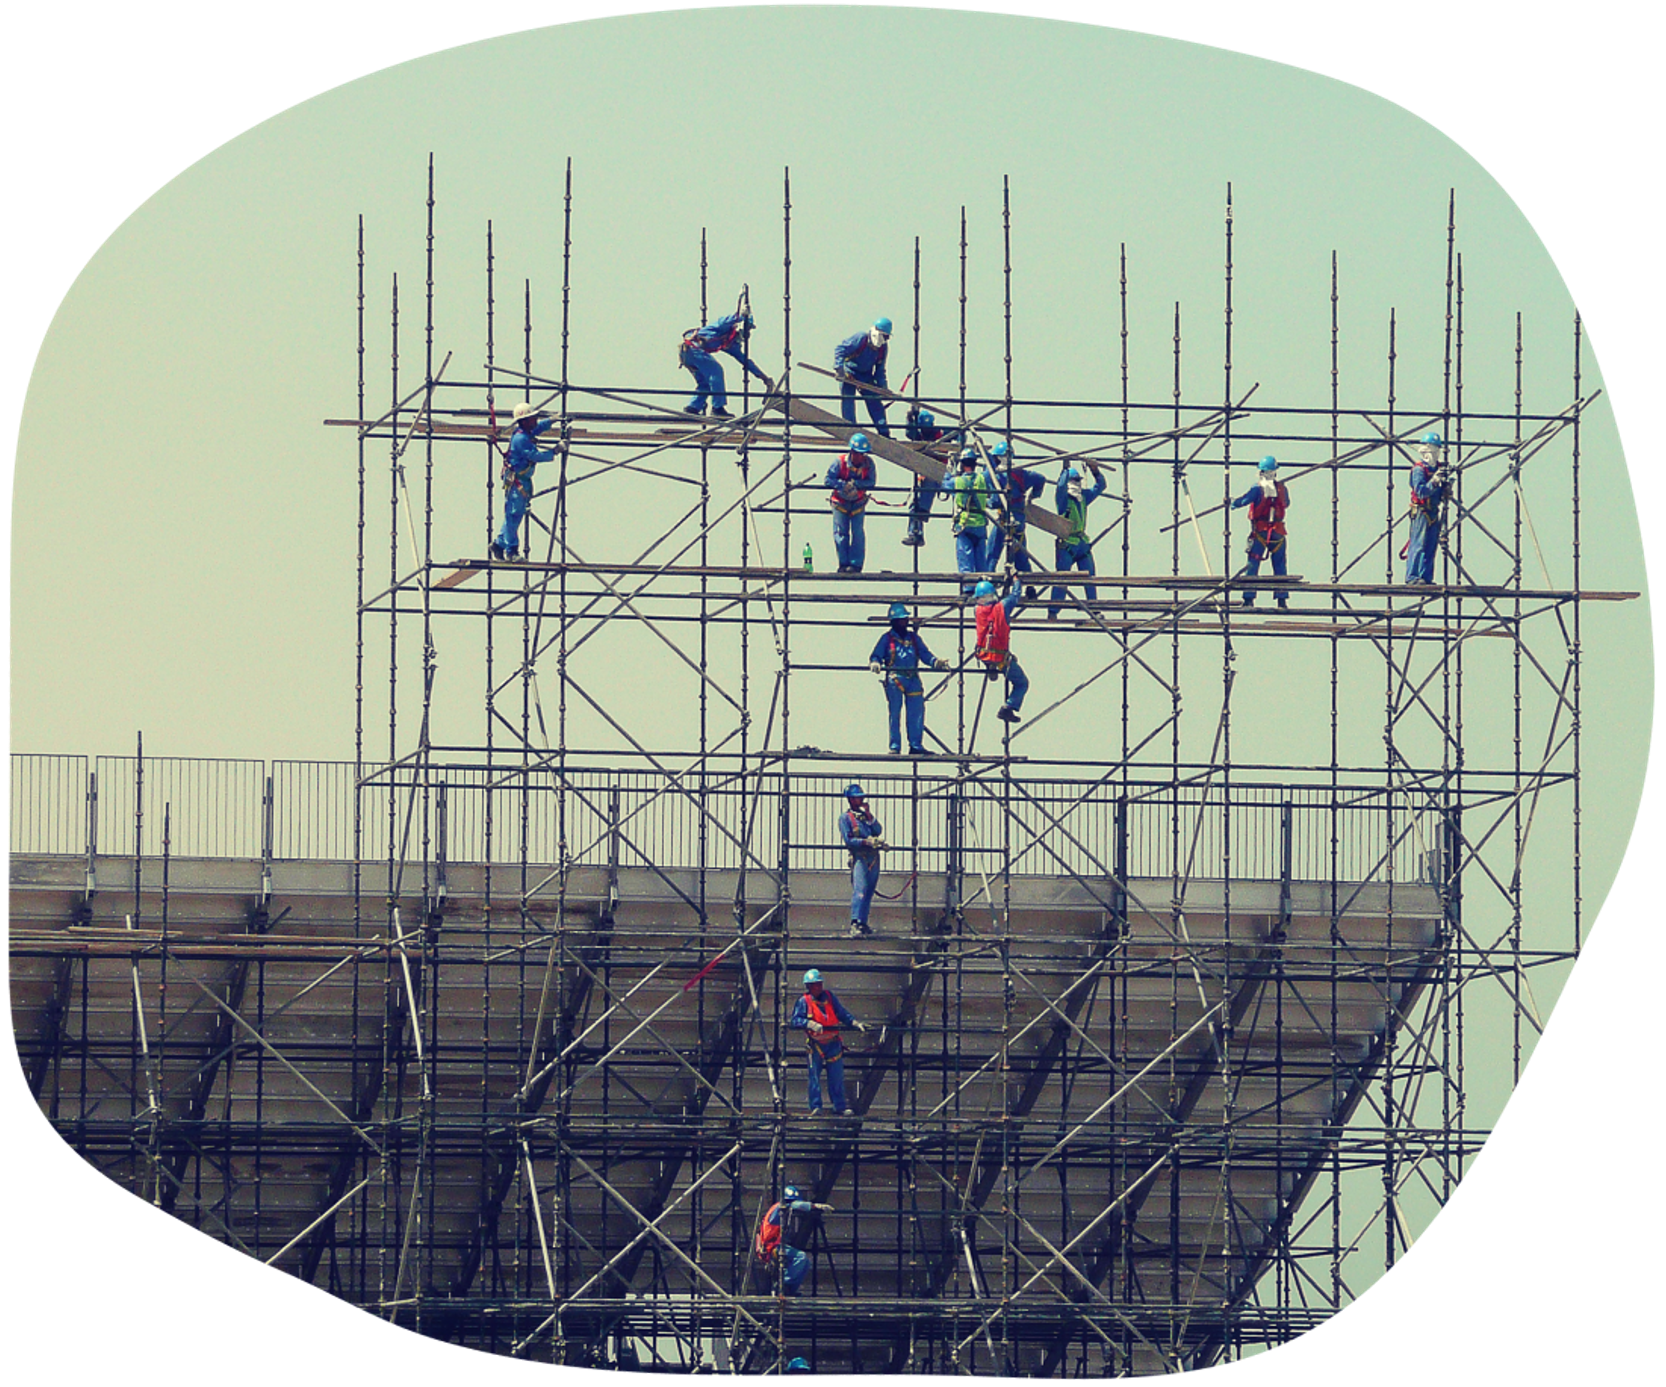 Workers constructing a stadium 